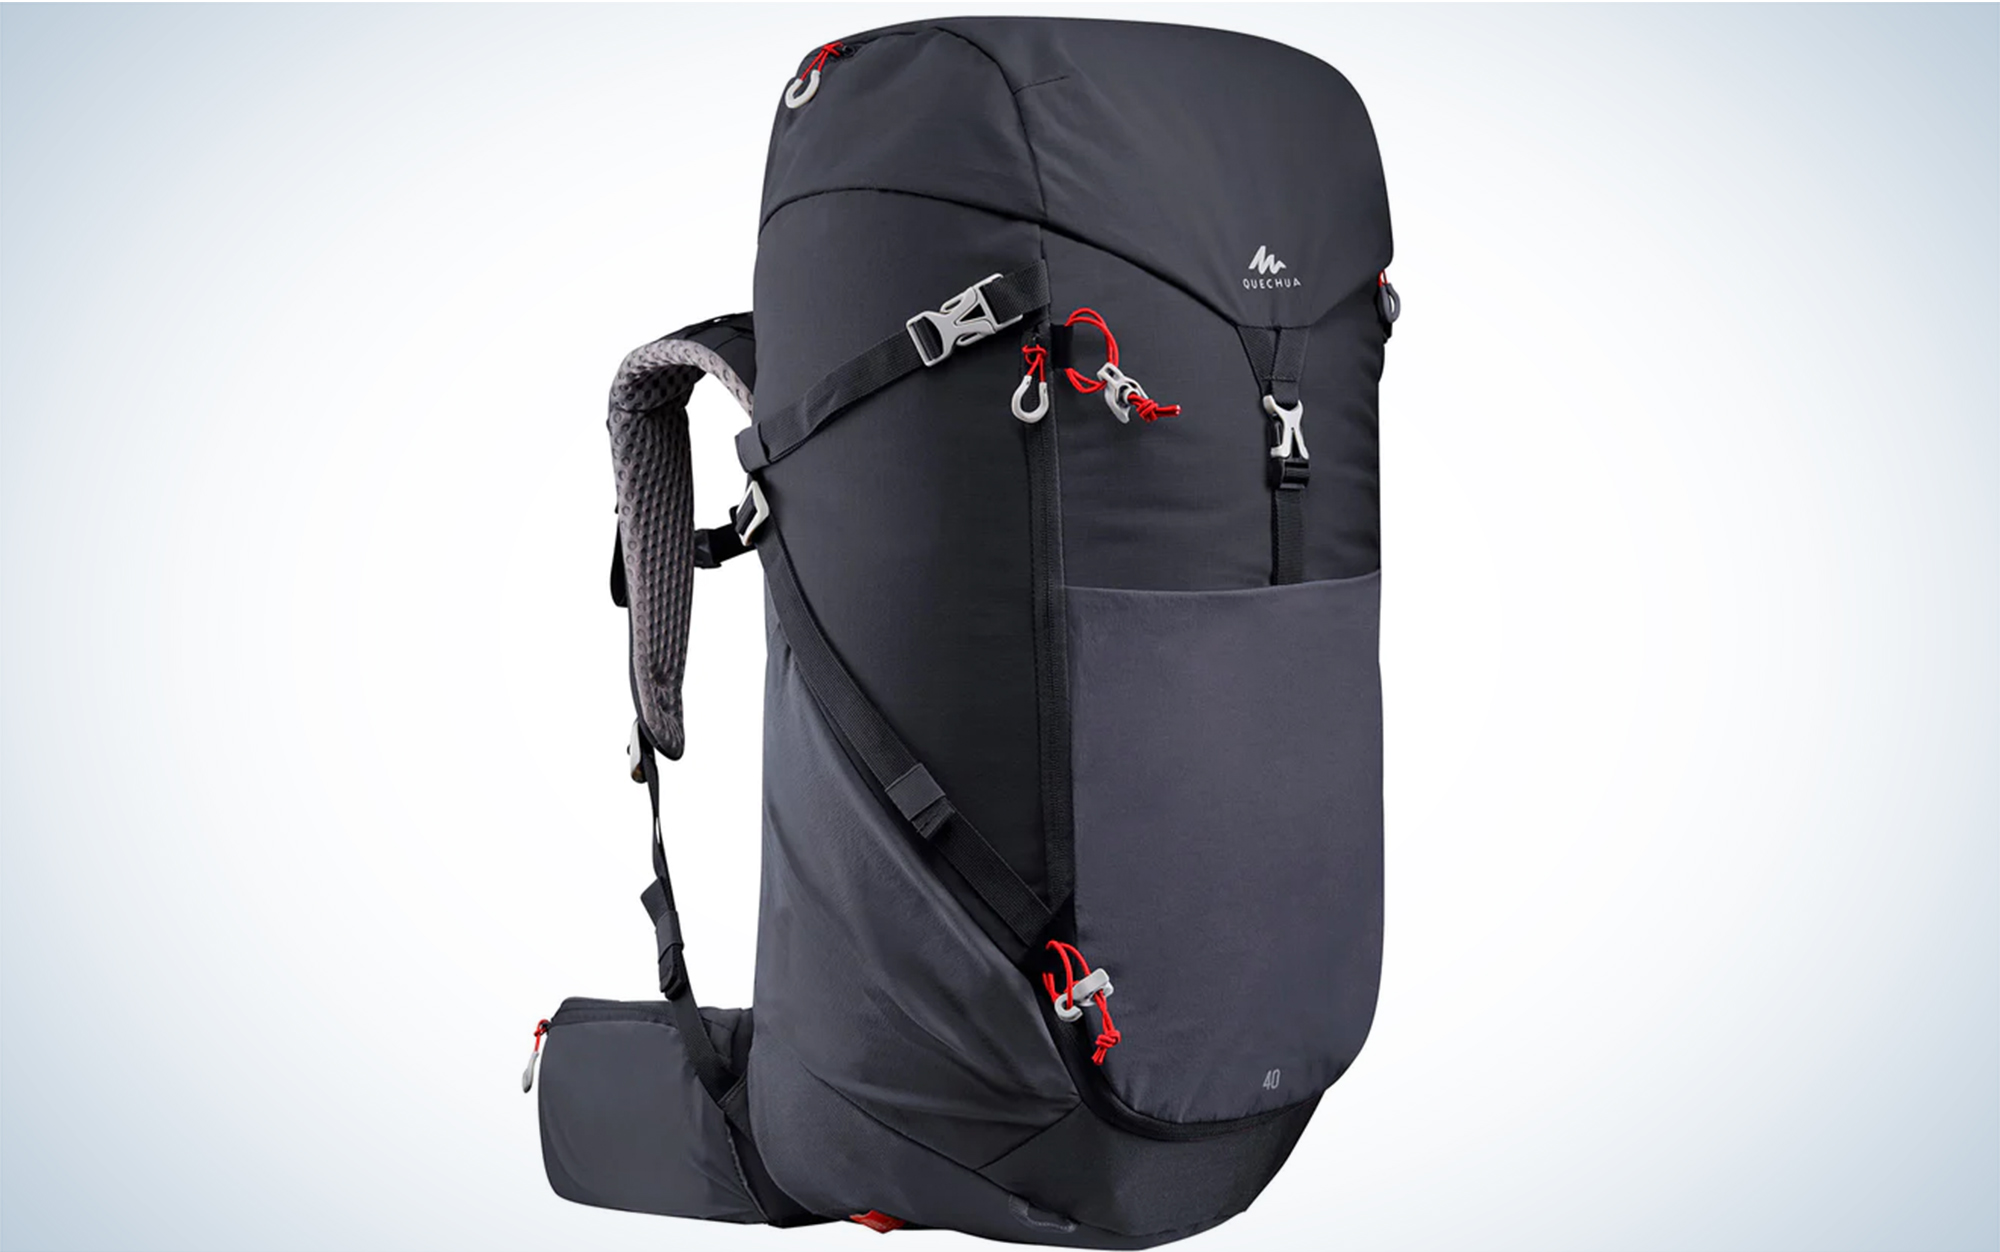 The Decathlon Quechua MH500 is one of the best hiking daypacks.